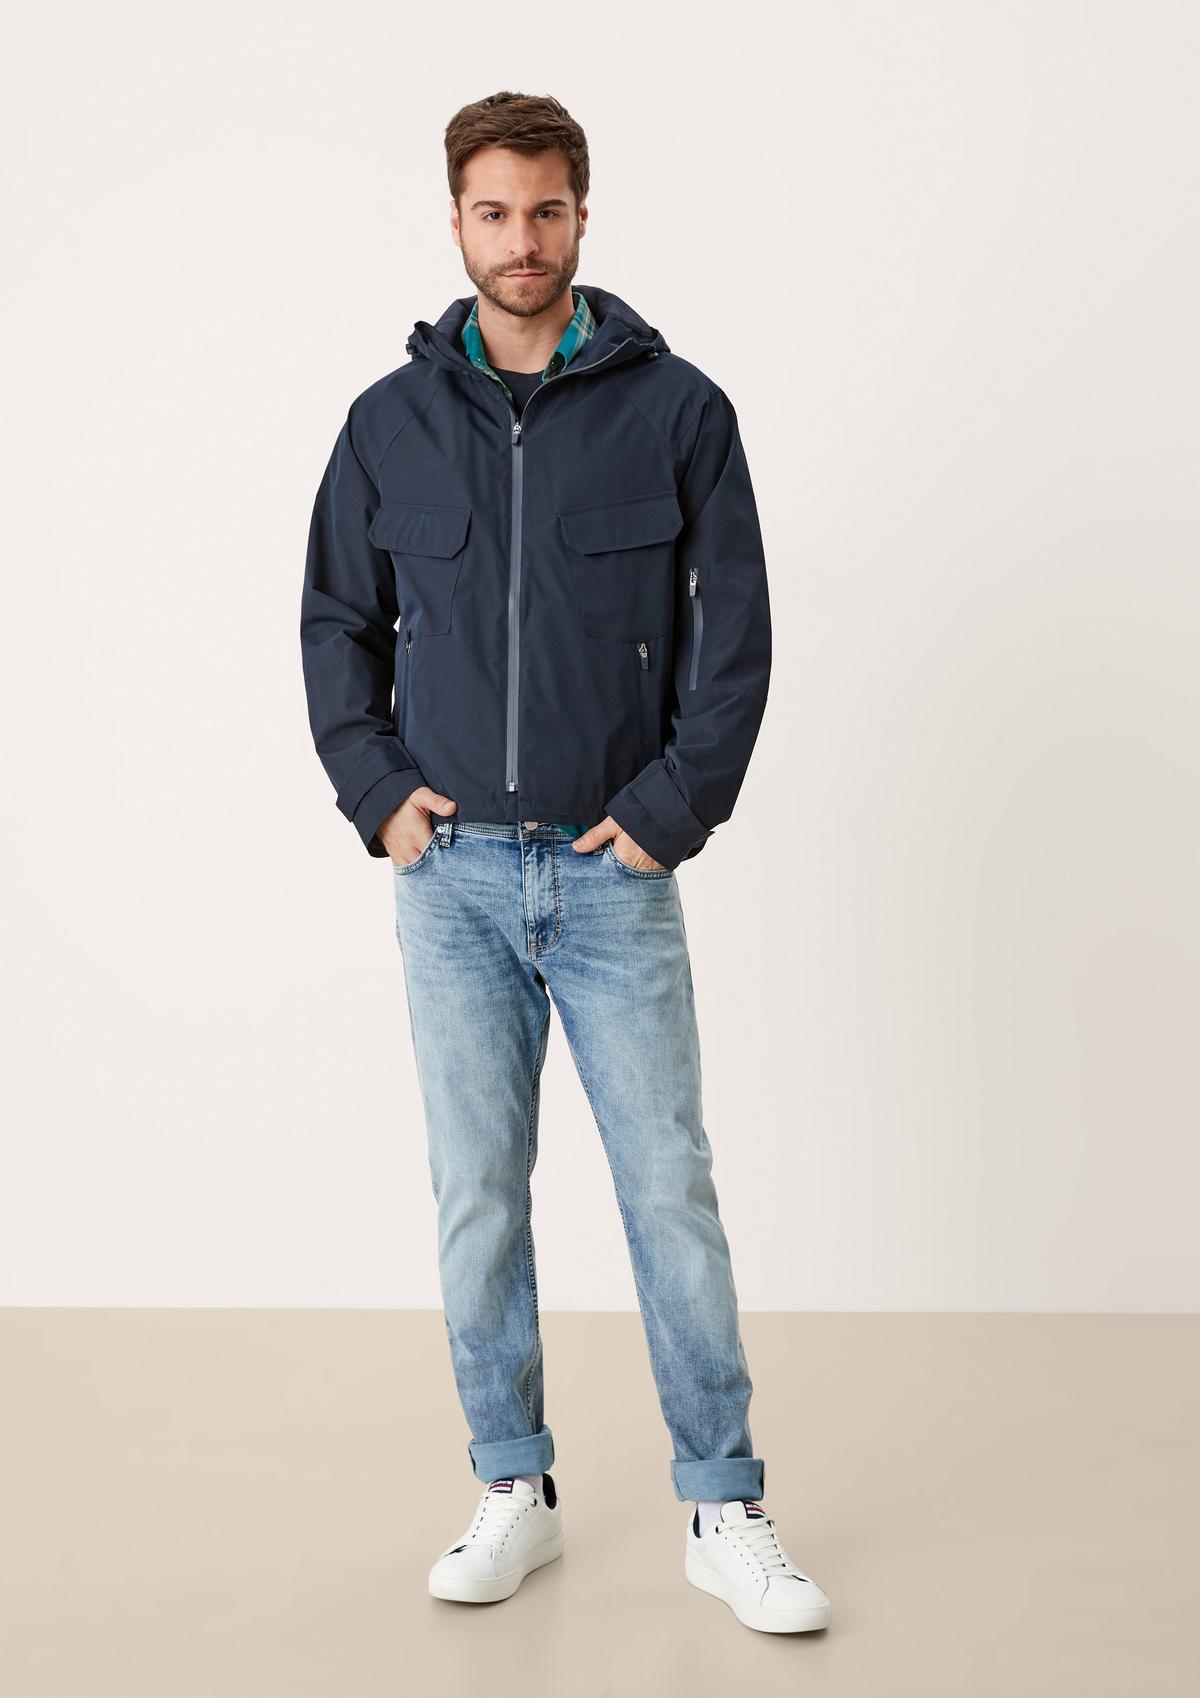 s.Oliver Weatherproof jacket with mesh lining